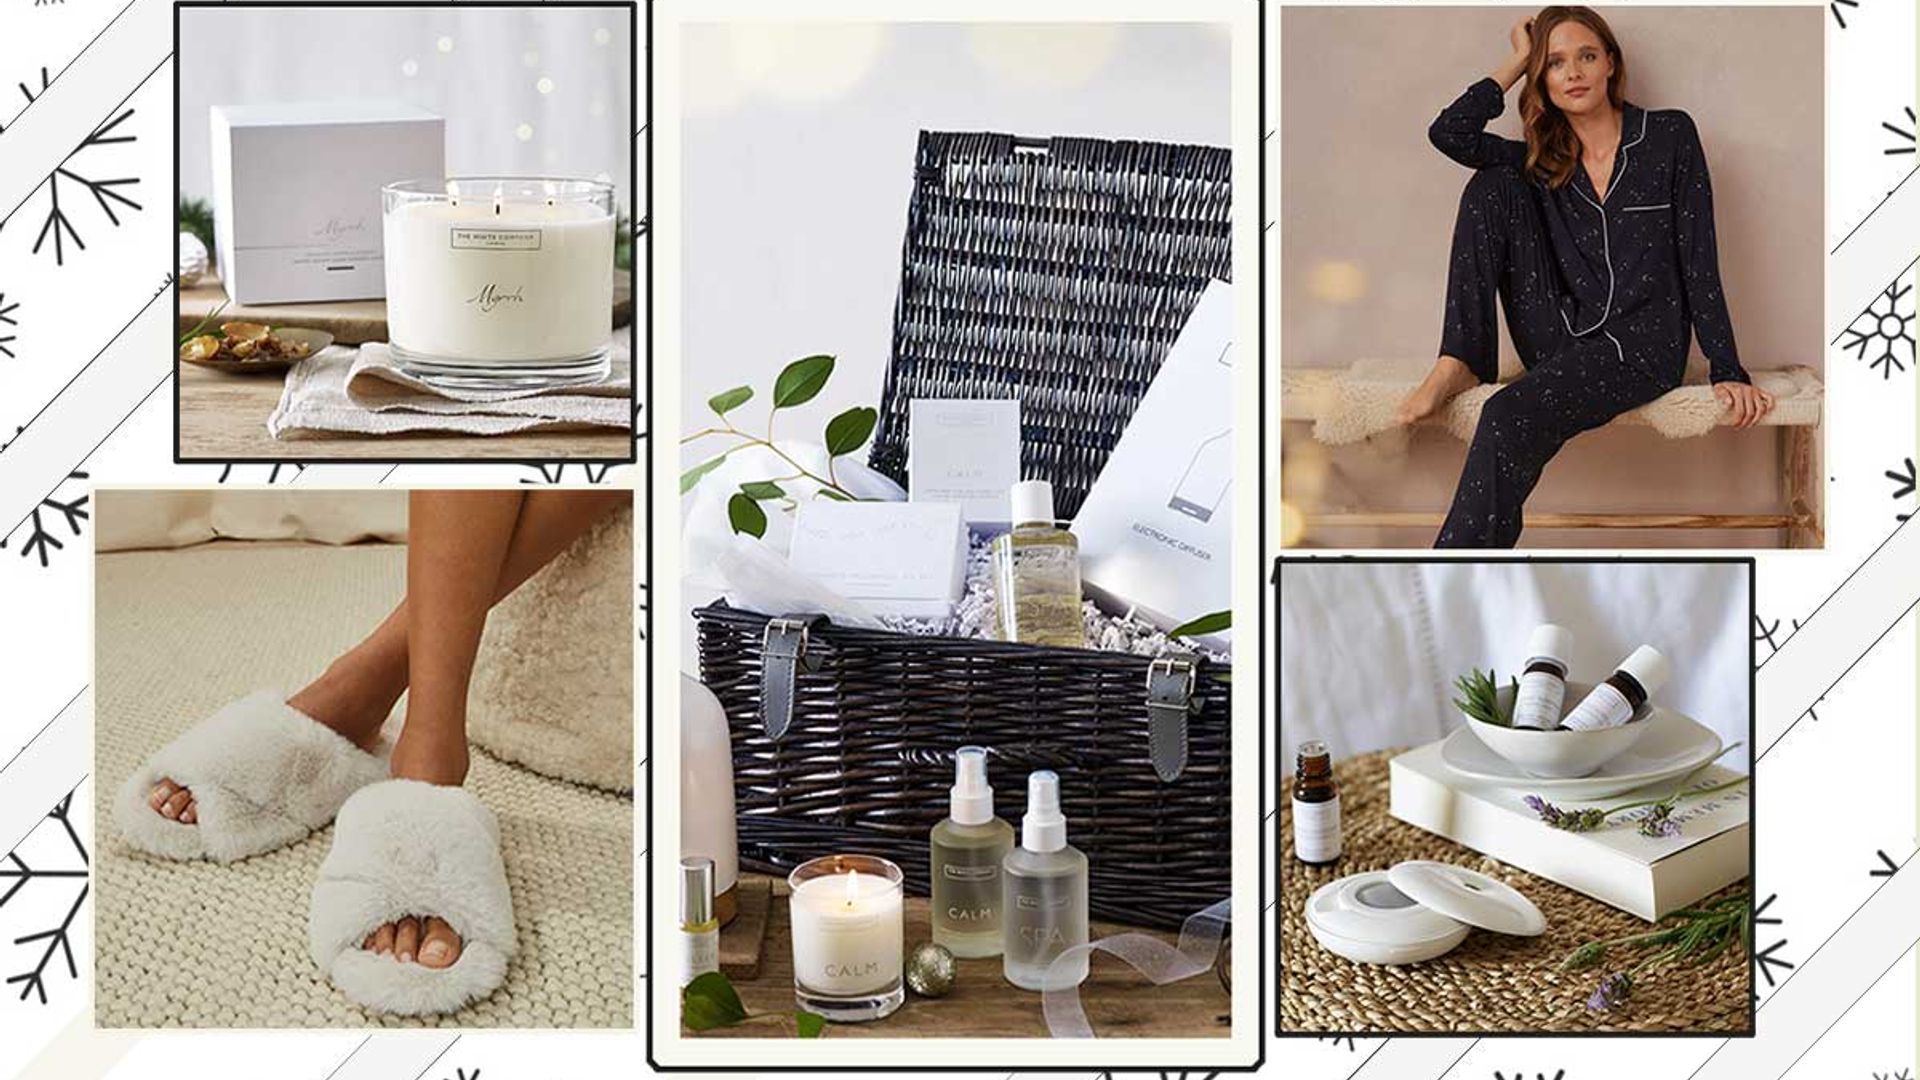 The White Company Christmas gifts we love for 2022: Pyjamas, cashmere socks, candles & more